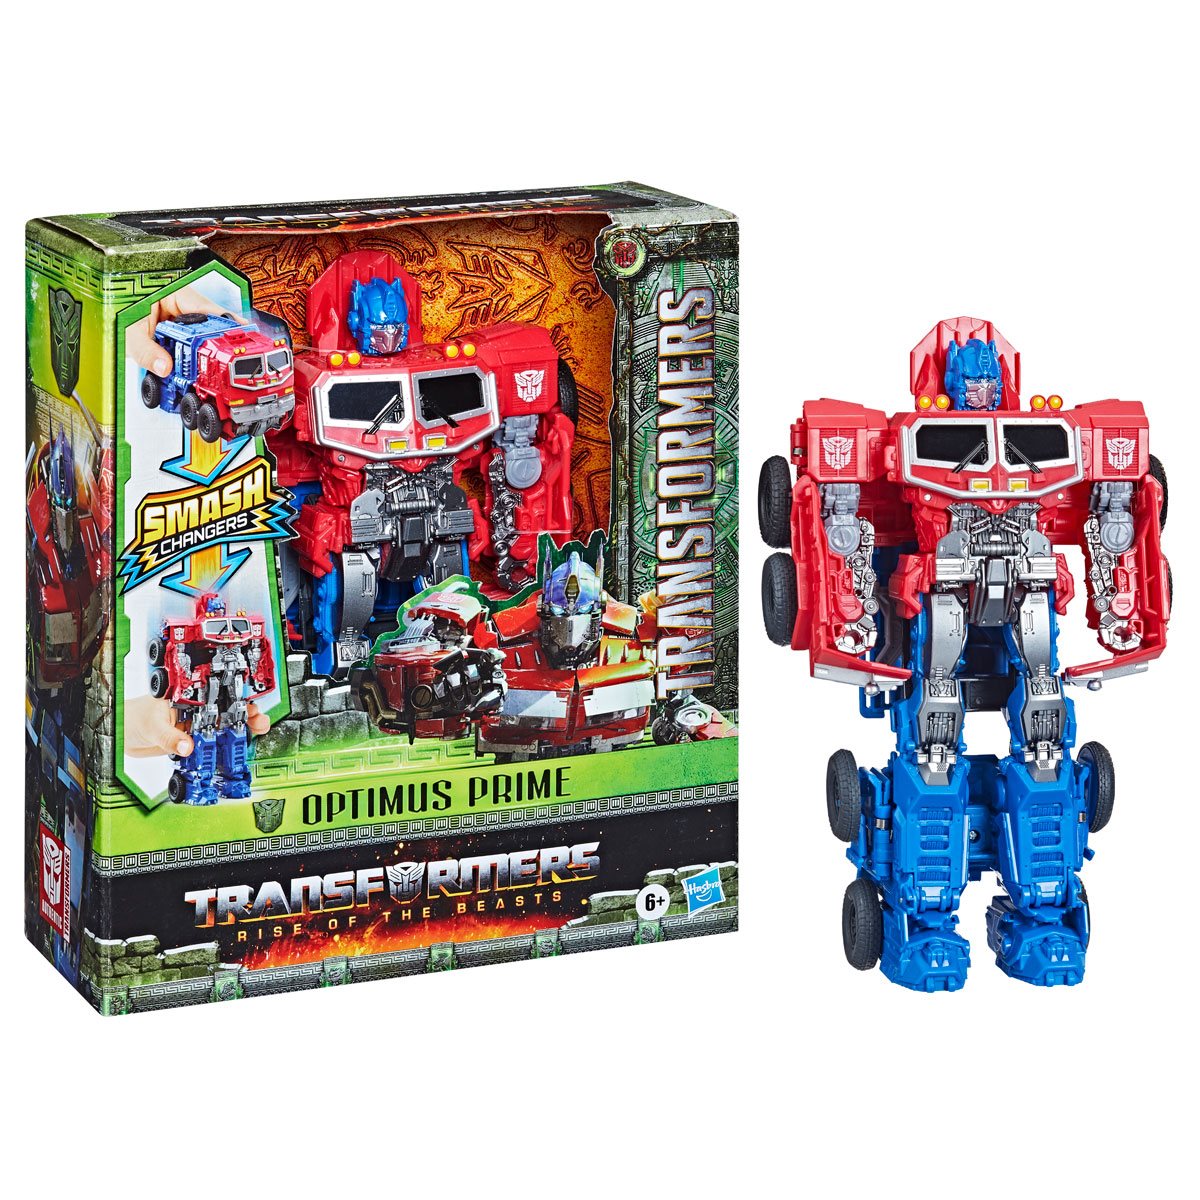 Transformers Rise of The Beasts - Smash Changer Optimus Prime Action Figure Toy 